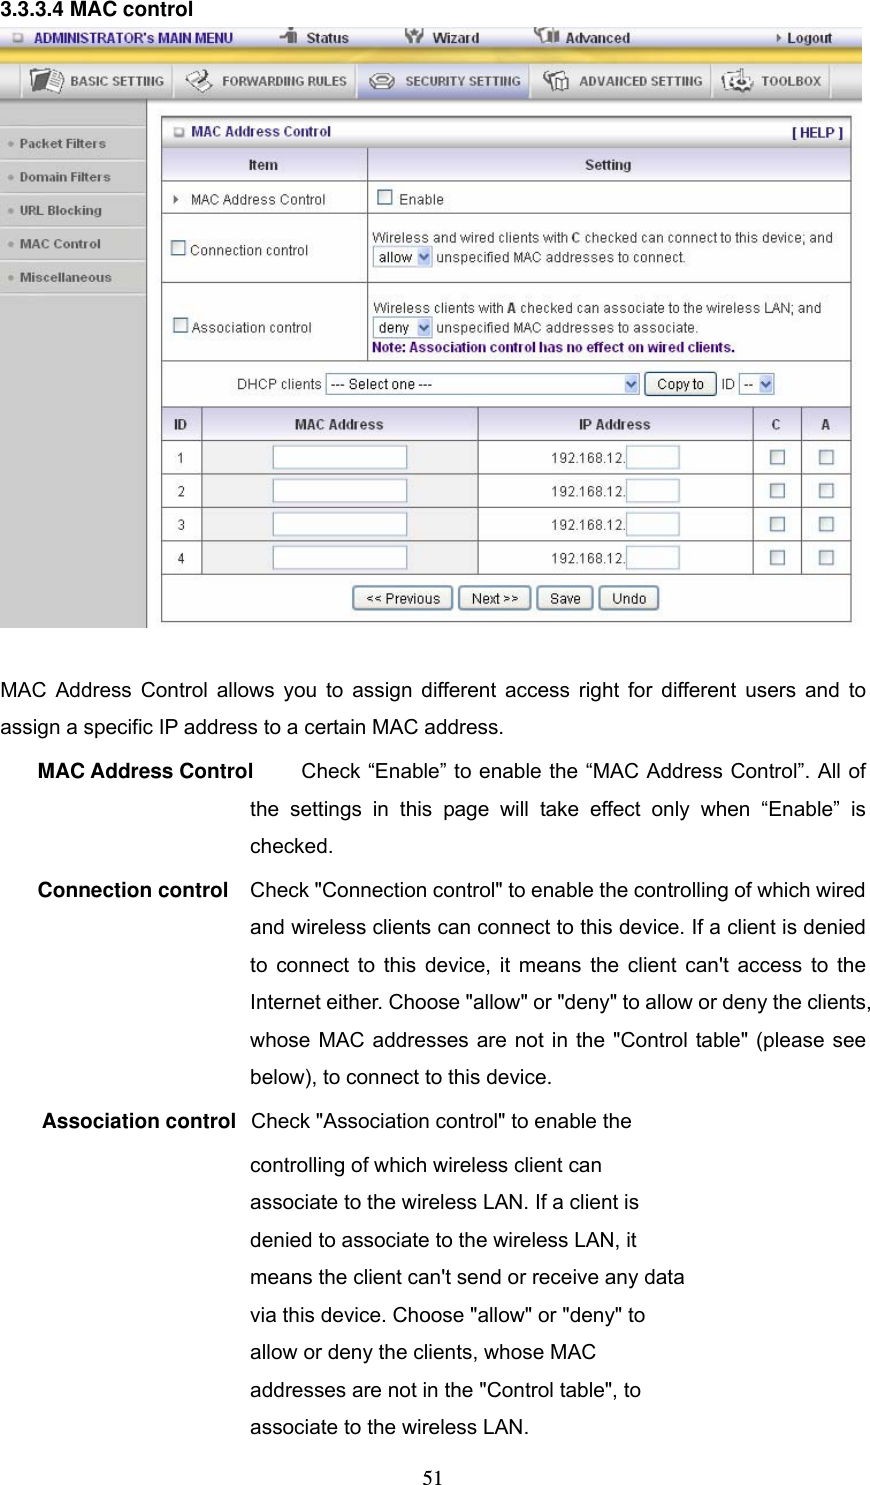  513.3.3.4 MAC control   MAC Address Control allows you to assign different access right for different users and to assign a specific IP address to a certain MAC address. MAC Address Control  Check “Enable” to enable the “MAC Address Control”. All of the settings in this page will take effect only when “Enable” is checked. Connection control  Check &quot;Connection control&quot; to enable the controlling of which wired and wireless clients can connect to this device. If a client is denied to connect to this device, it means the client can&apos;t access to the Internet either. Choose &quot;allow&quot; or &quot;deny&quot; to allow or deny the clients, whose MAC addresses are not in the &quot;Control table&quot; (please see below), to connect to this device. Association control  Check &quot;Association control&quot; to enable the controlling of which wireless client can associate to the wireless LAN. If a client is denied to associate to the wireless LAN, it means the client can&apos;t send or receive any data via this device. Choose &quot;allow&quot; or &quot;deny&quot; to allow or deny the clients, whose MAC addresses are not in the &quot;Control table&quot;, to associate to the wireless LAN. 